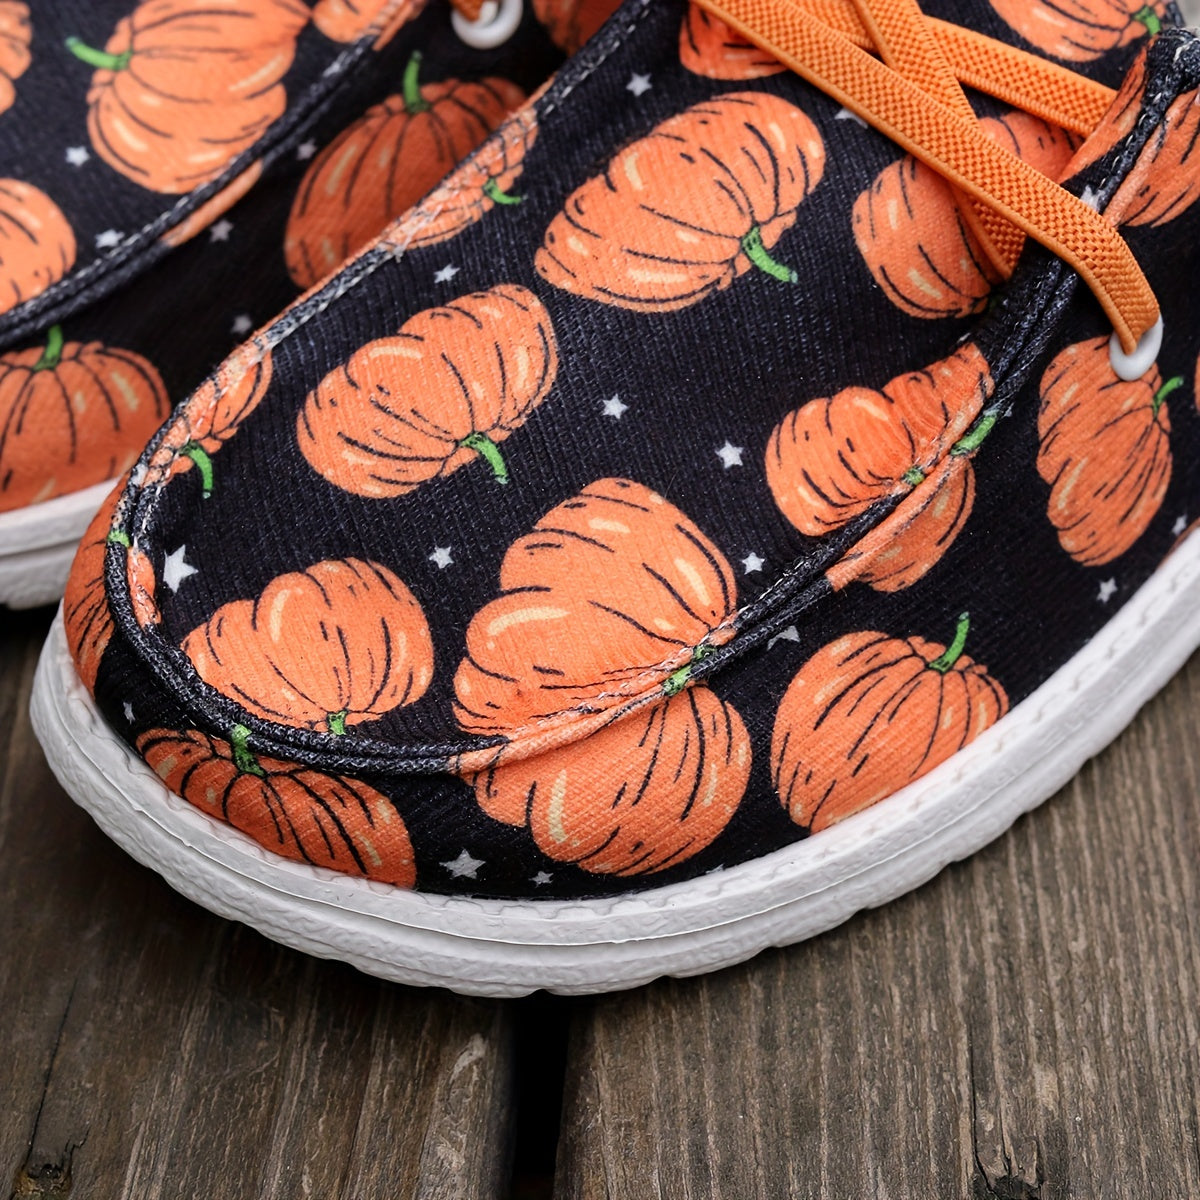 Women's Pumpkin Pattern Canvas Shoes, Causal Lace Up Low Top Flat Shoes, Halloween Style Shoes